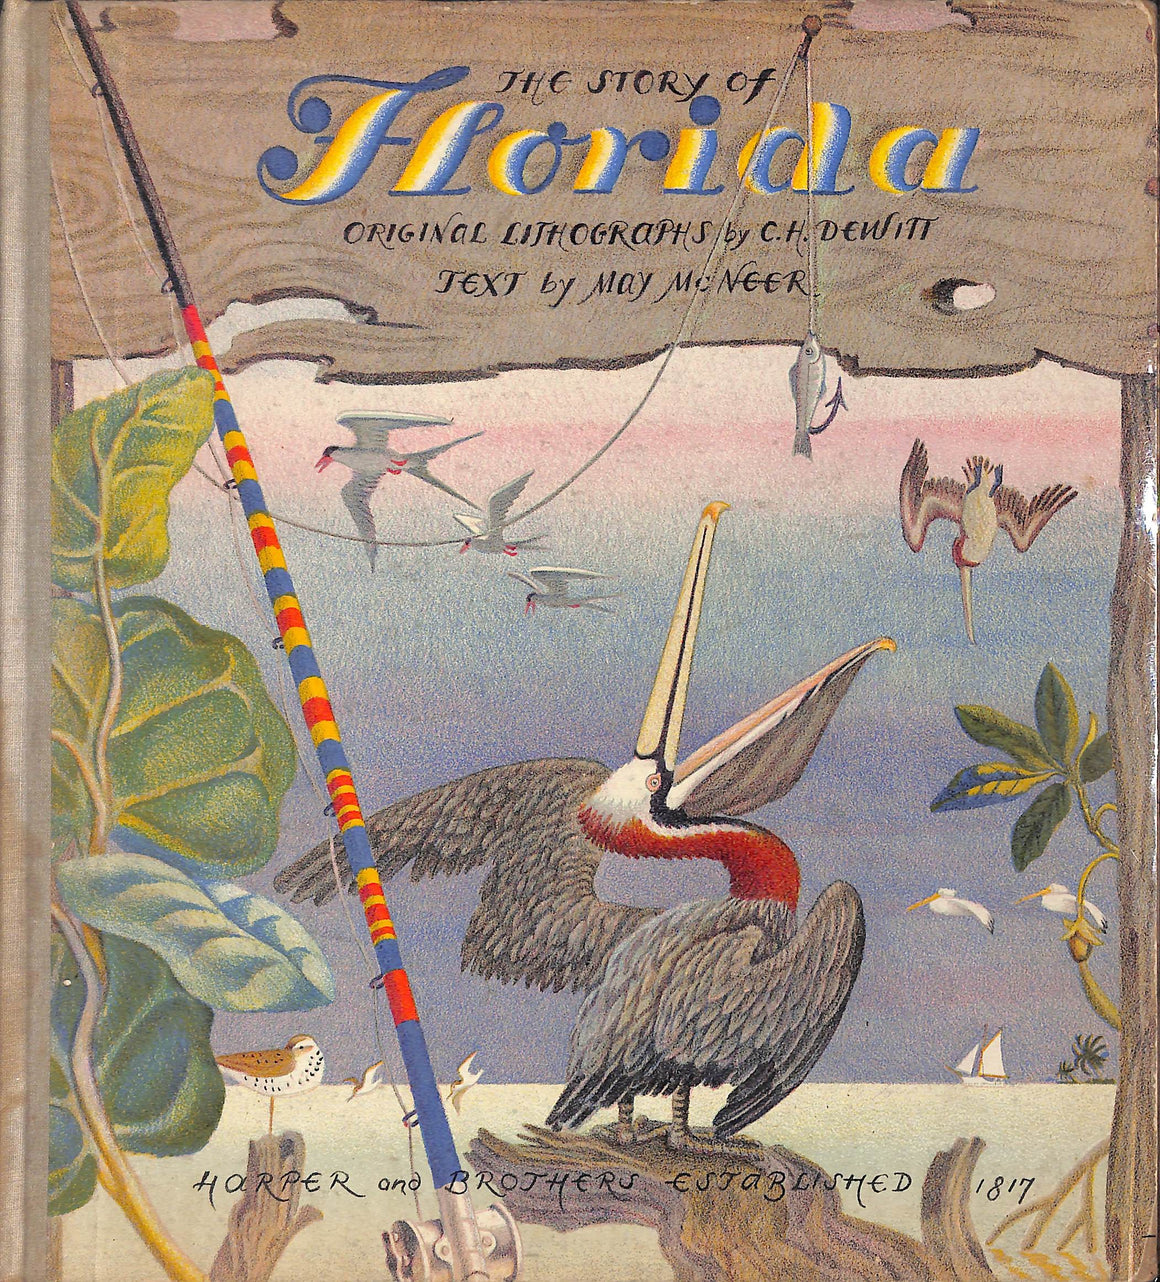 "The Story Of Florida" 1947 MCNEER, May [text by]